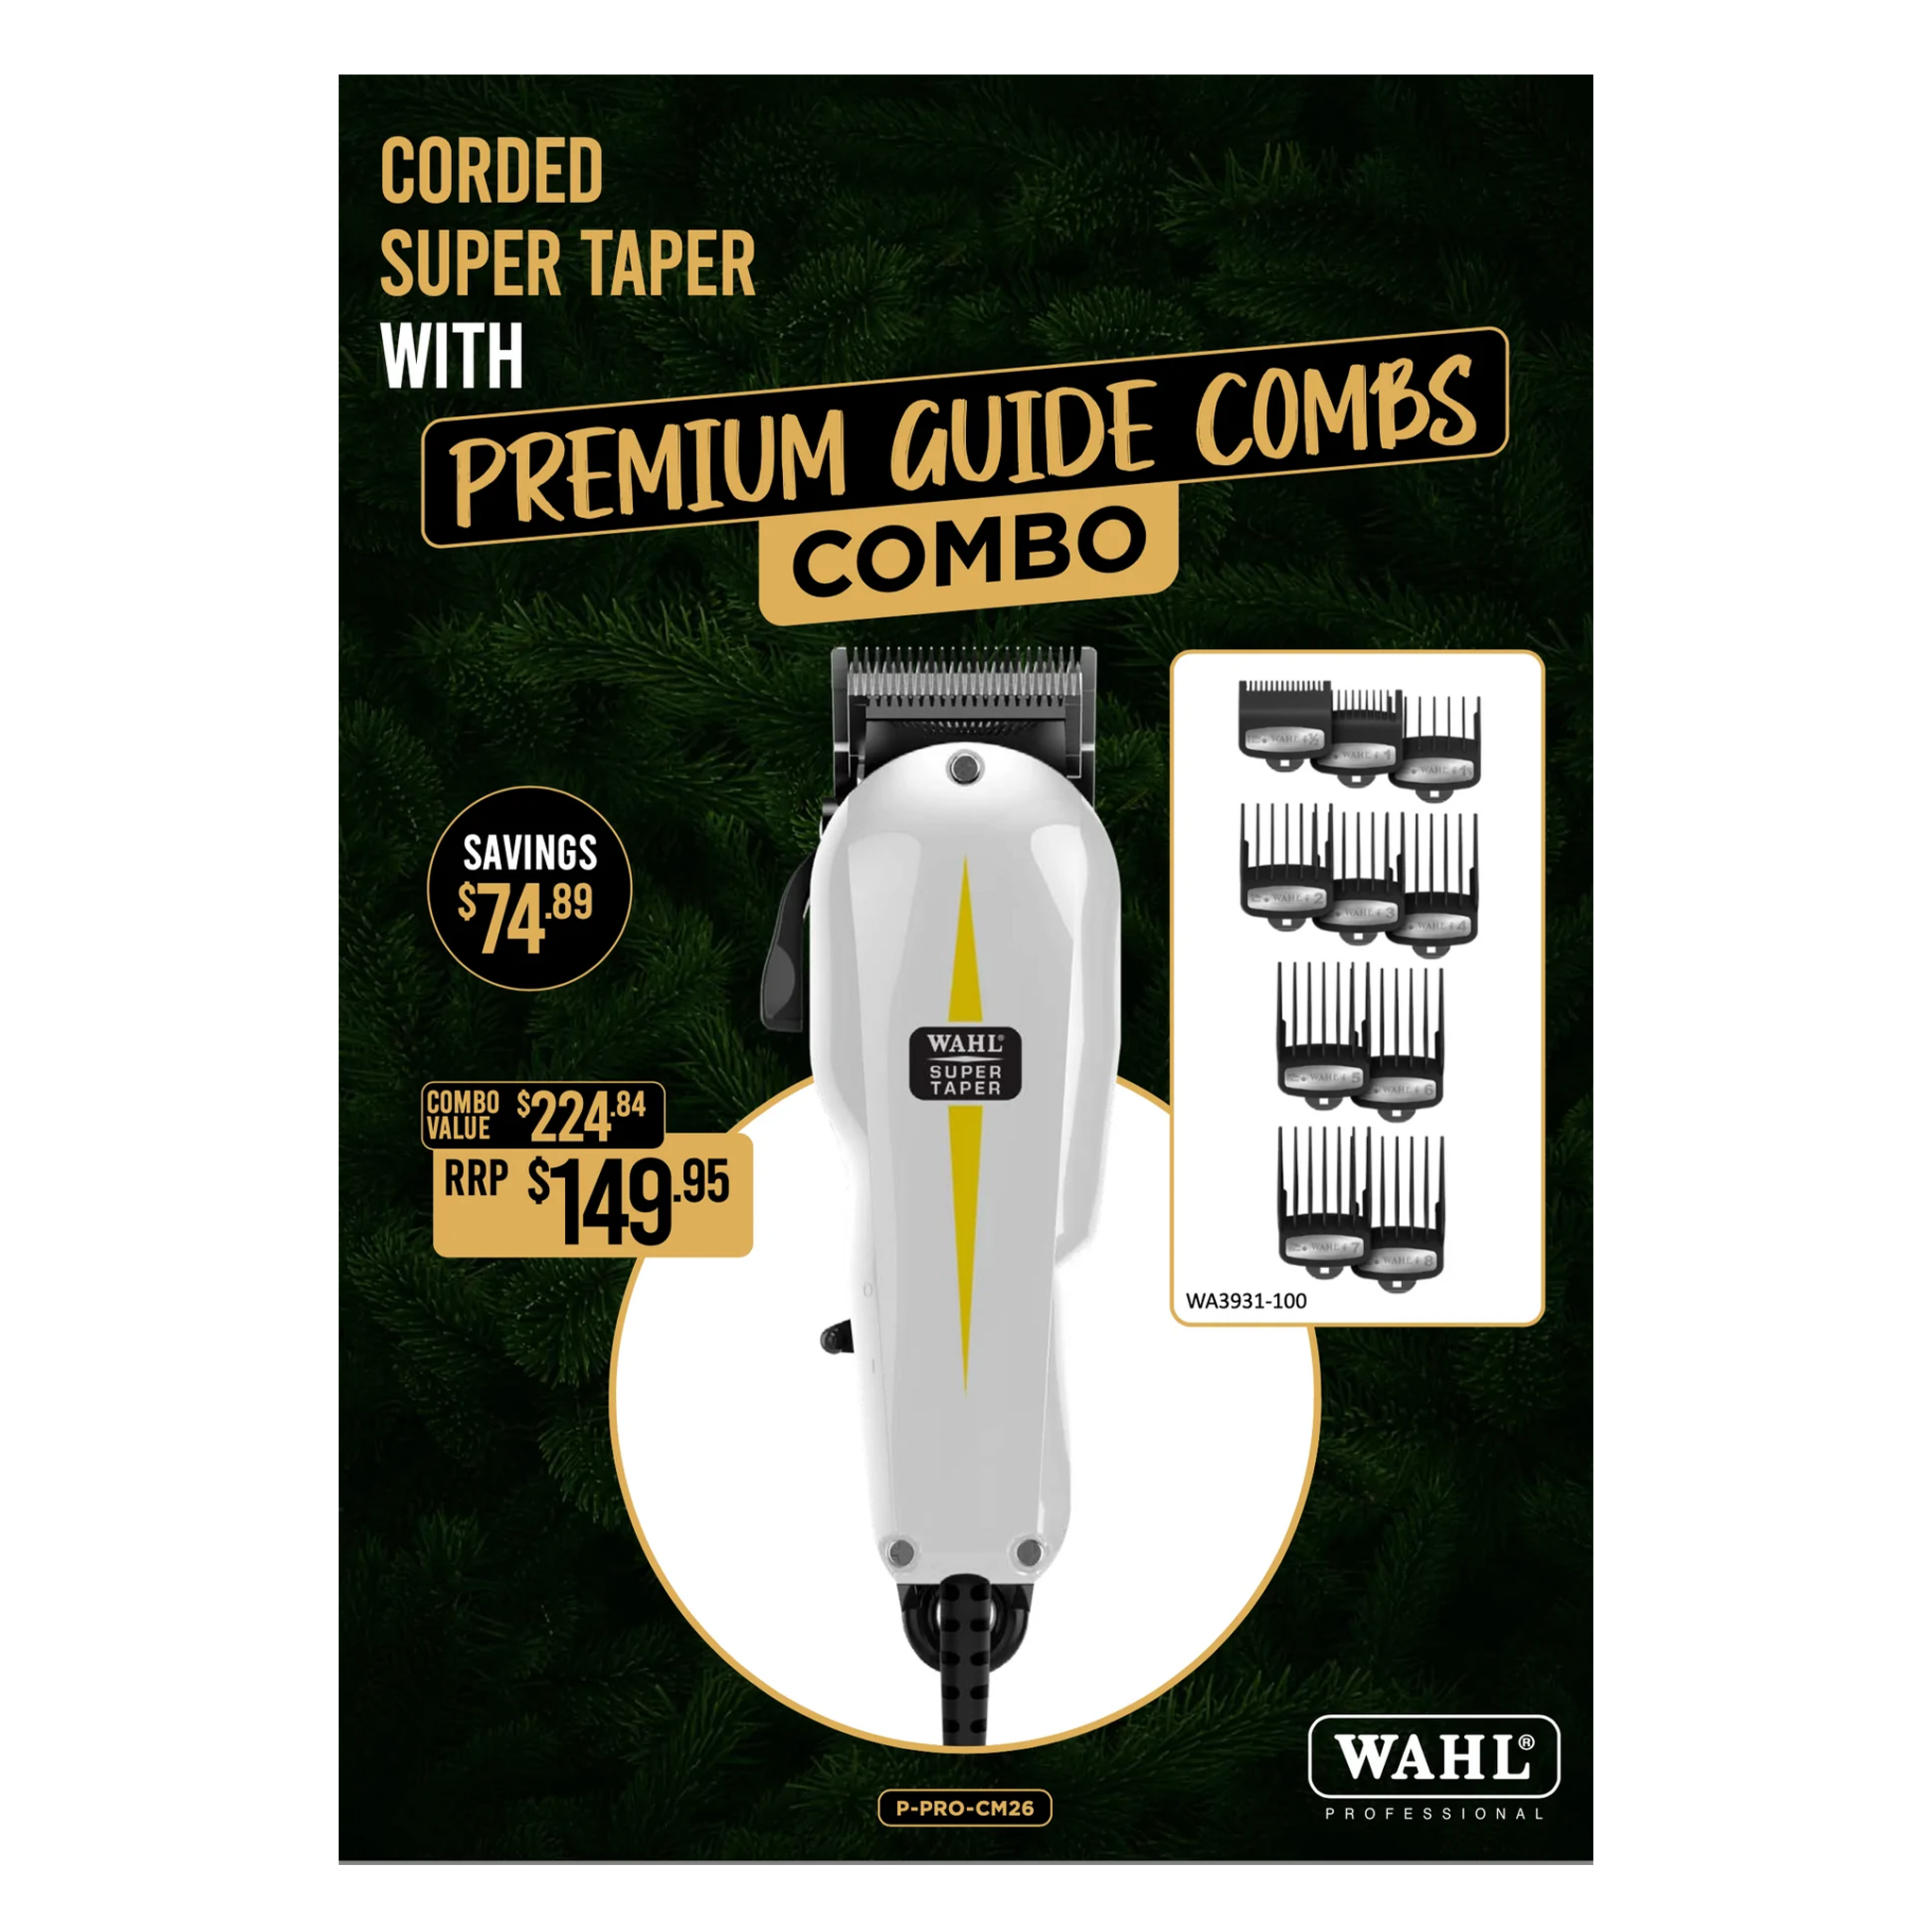 Corded Super Taper with Premium Guide Combs Combo